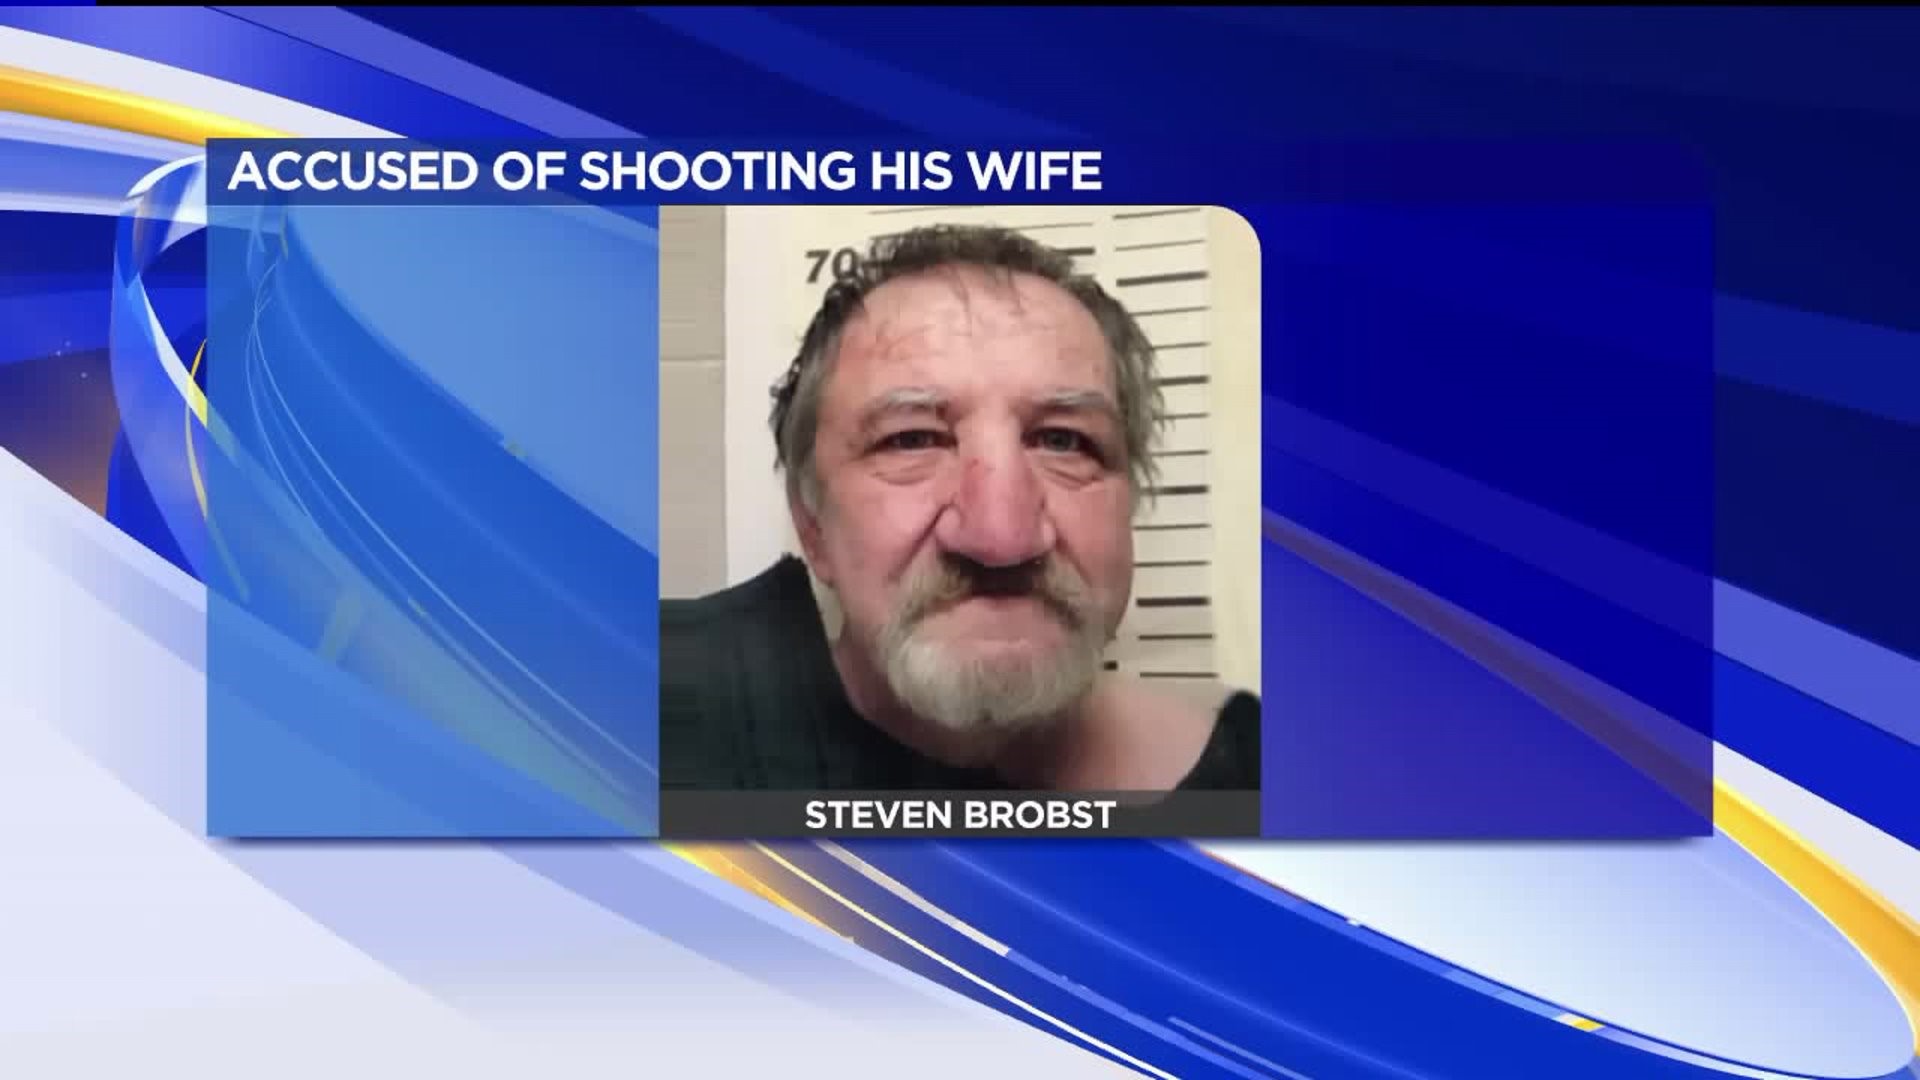 Police: Suspect in Schuylkill County Shooting Tried to Kill His Wife